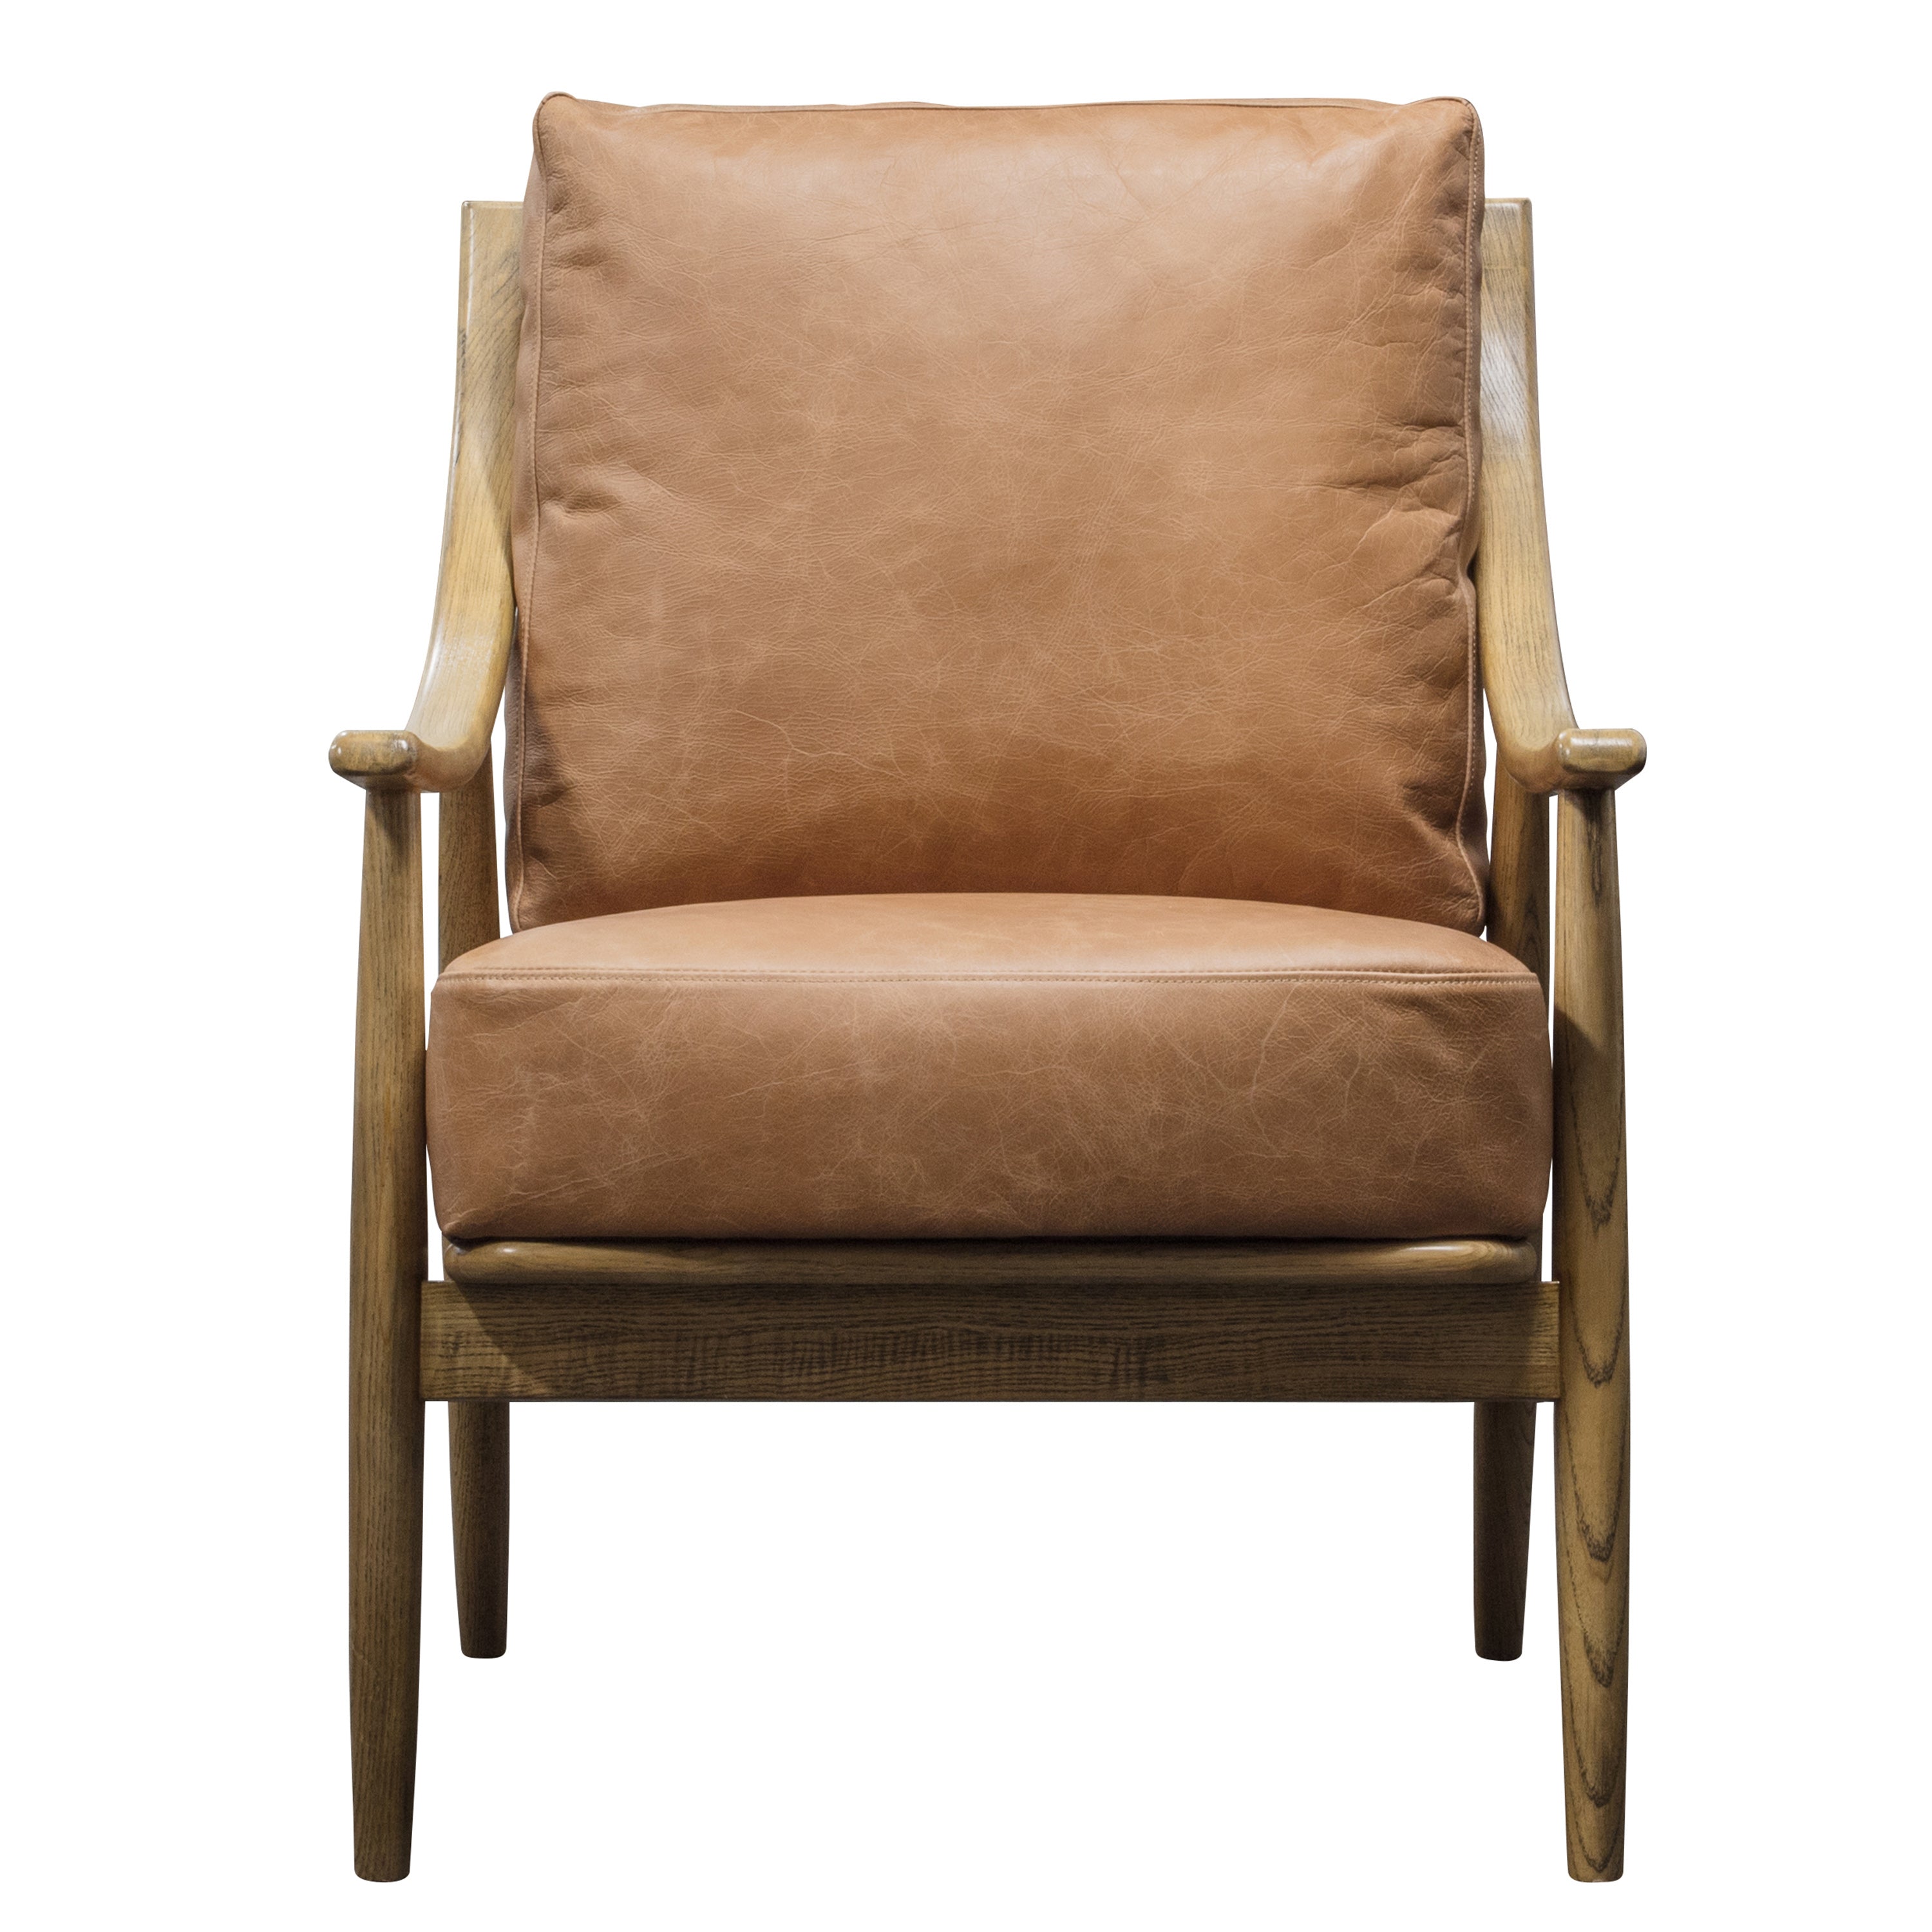 Crispin Armchair Brown Leather